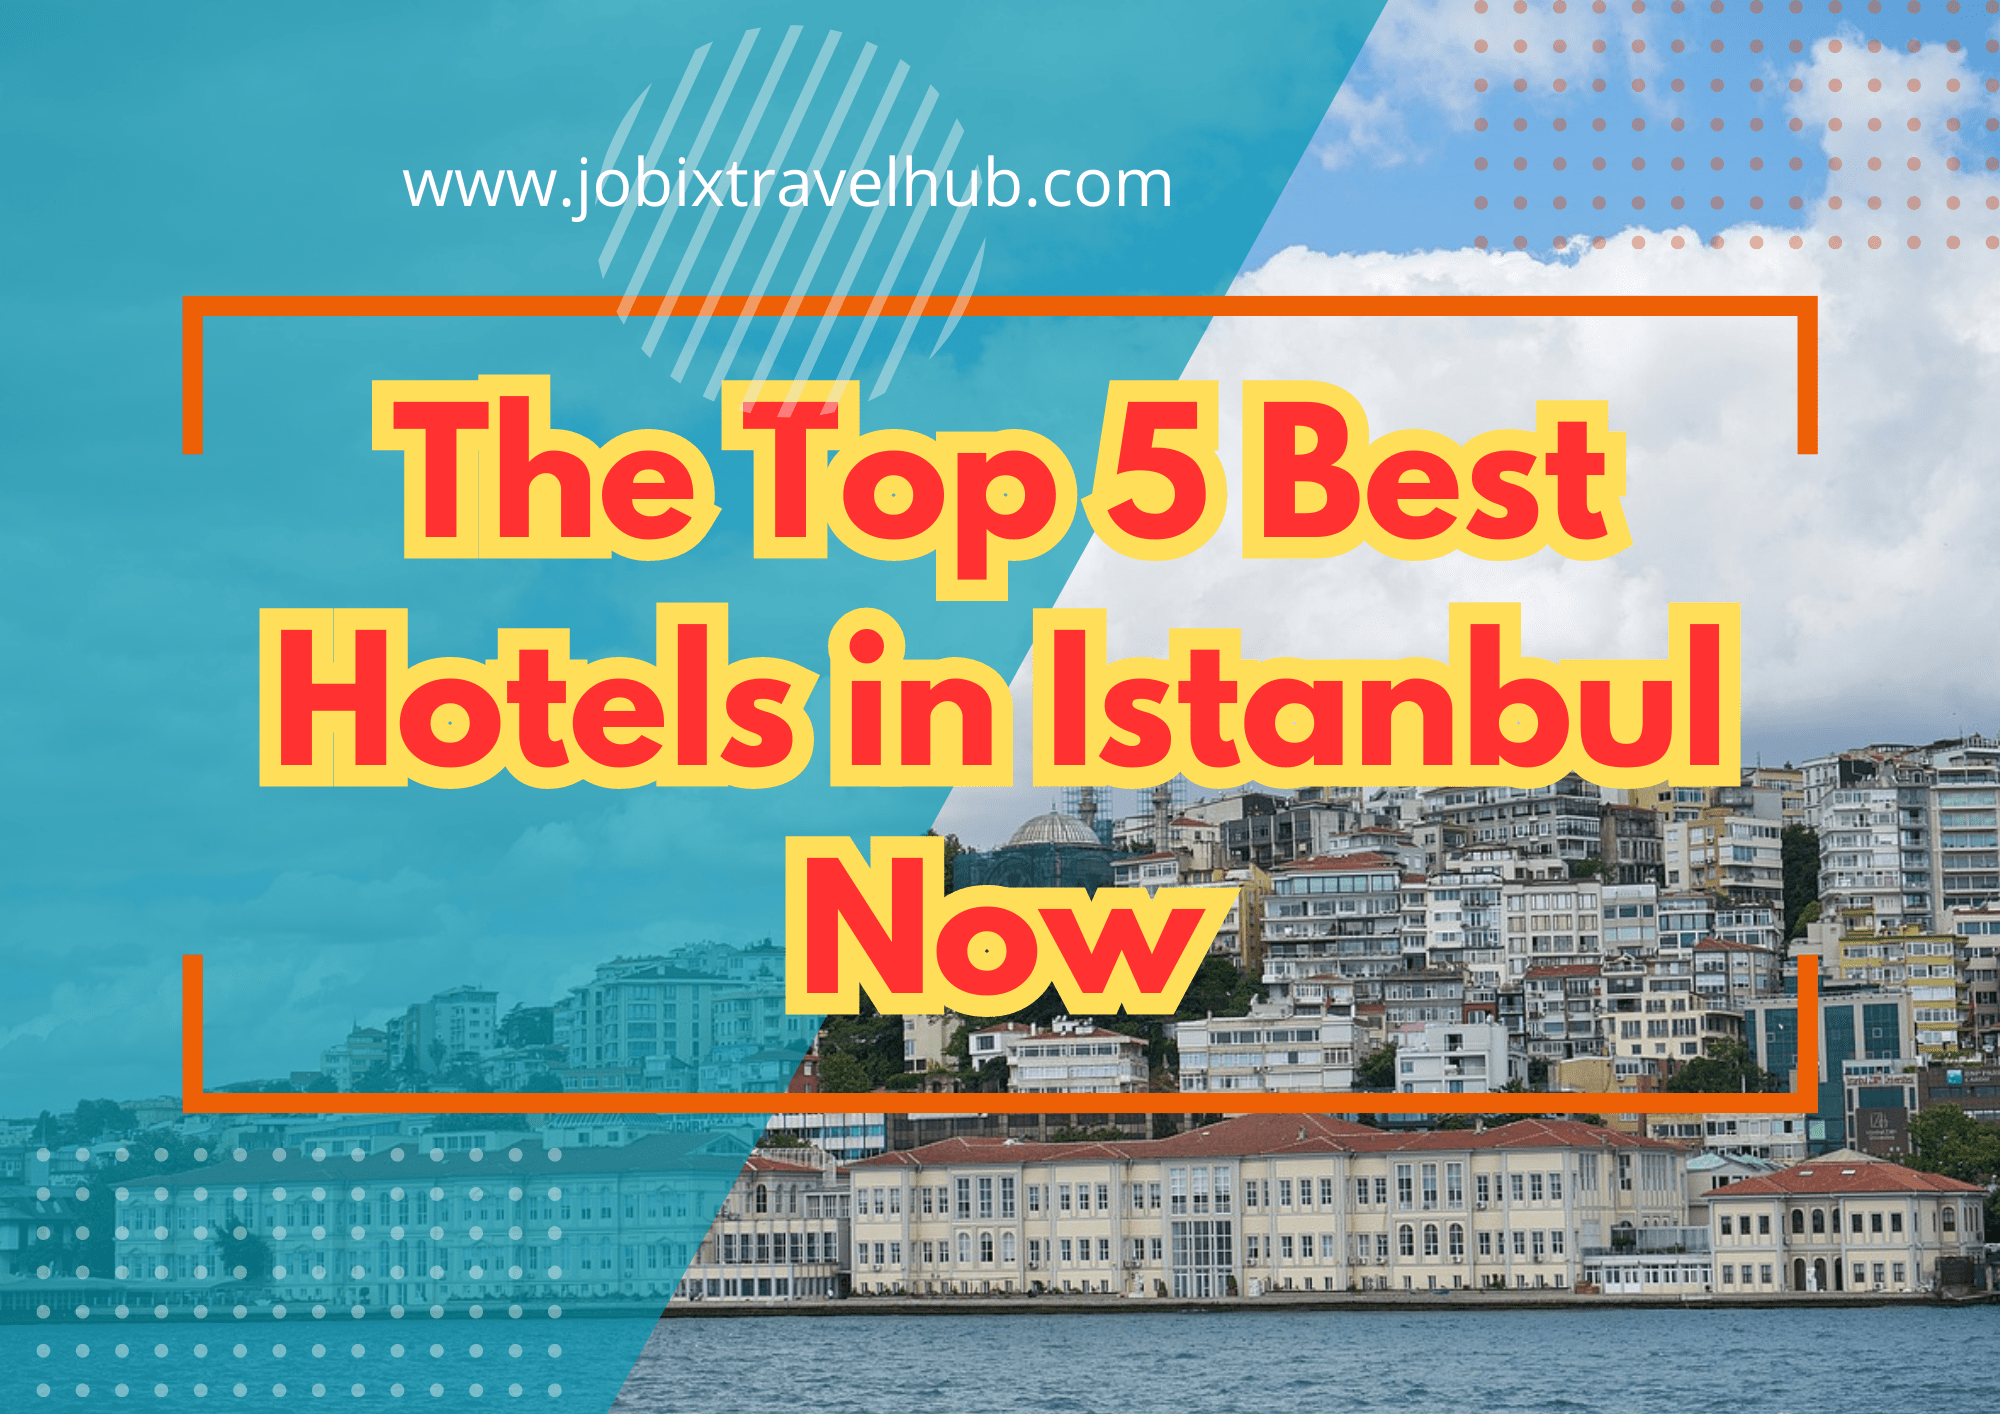 The Top 5 Best Hotels in Istanbul Now